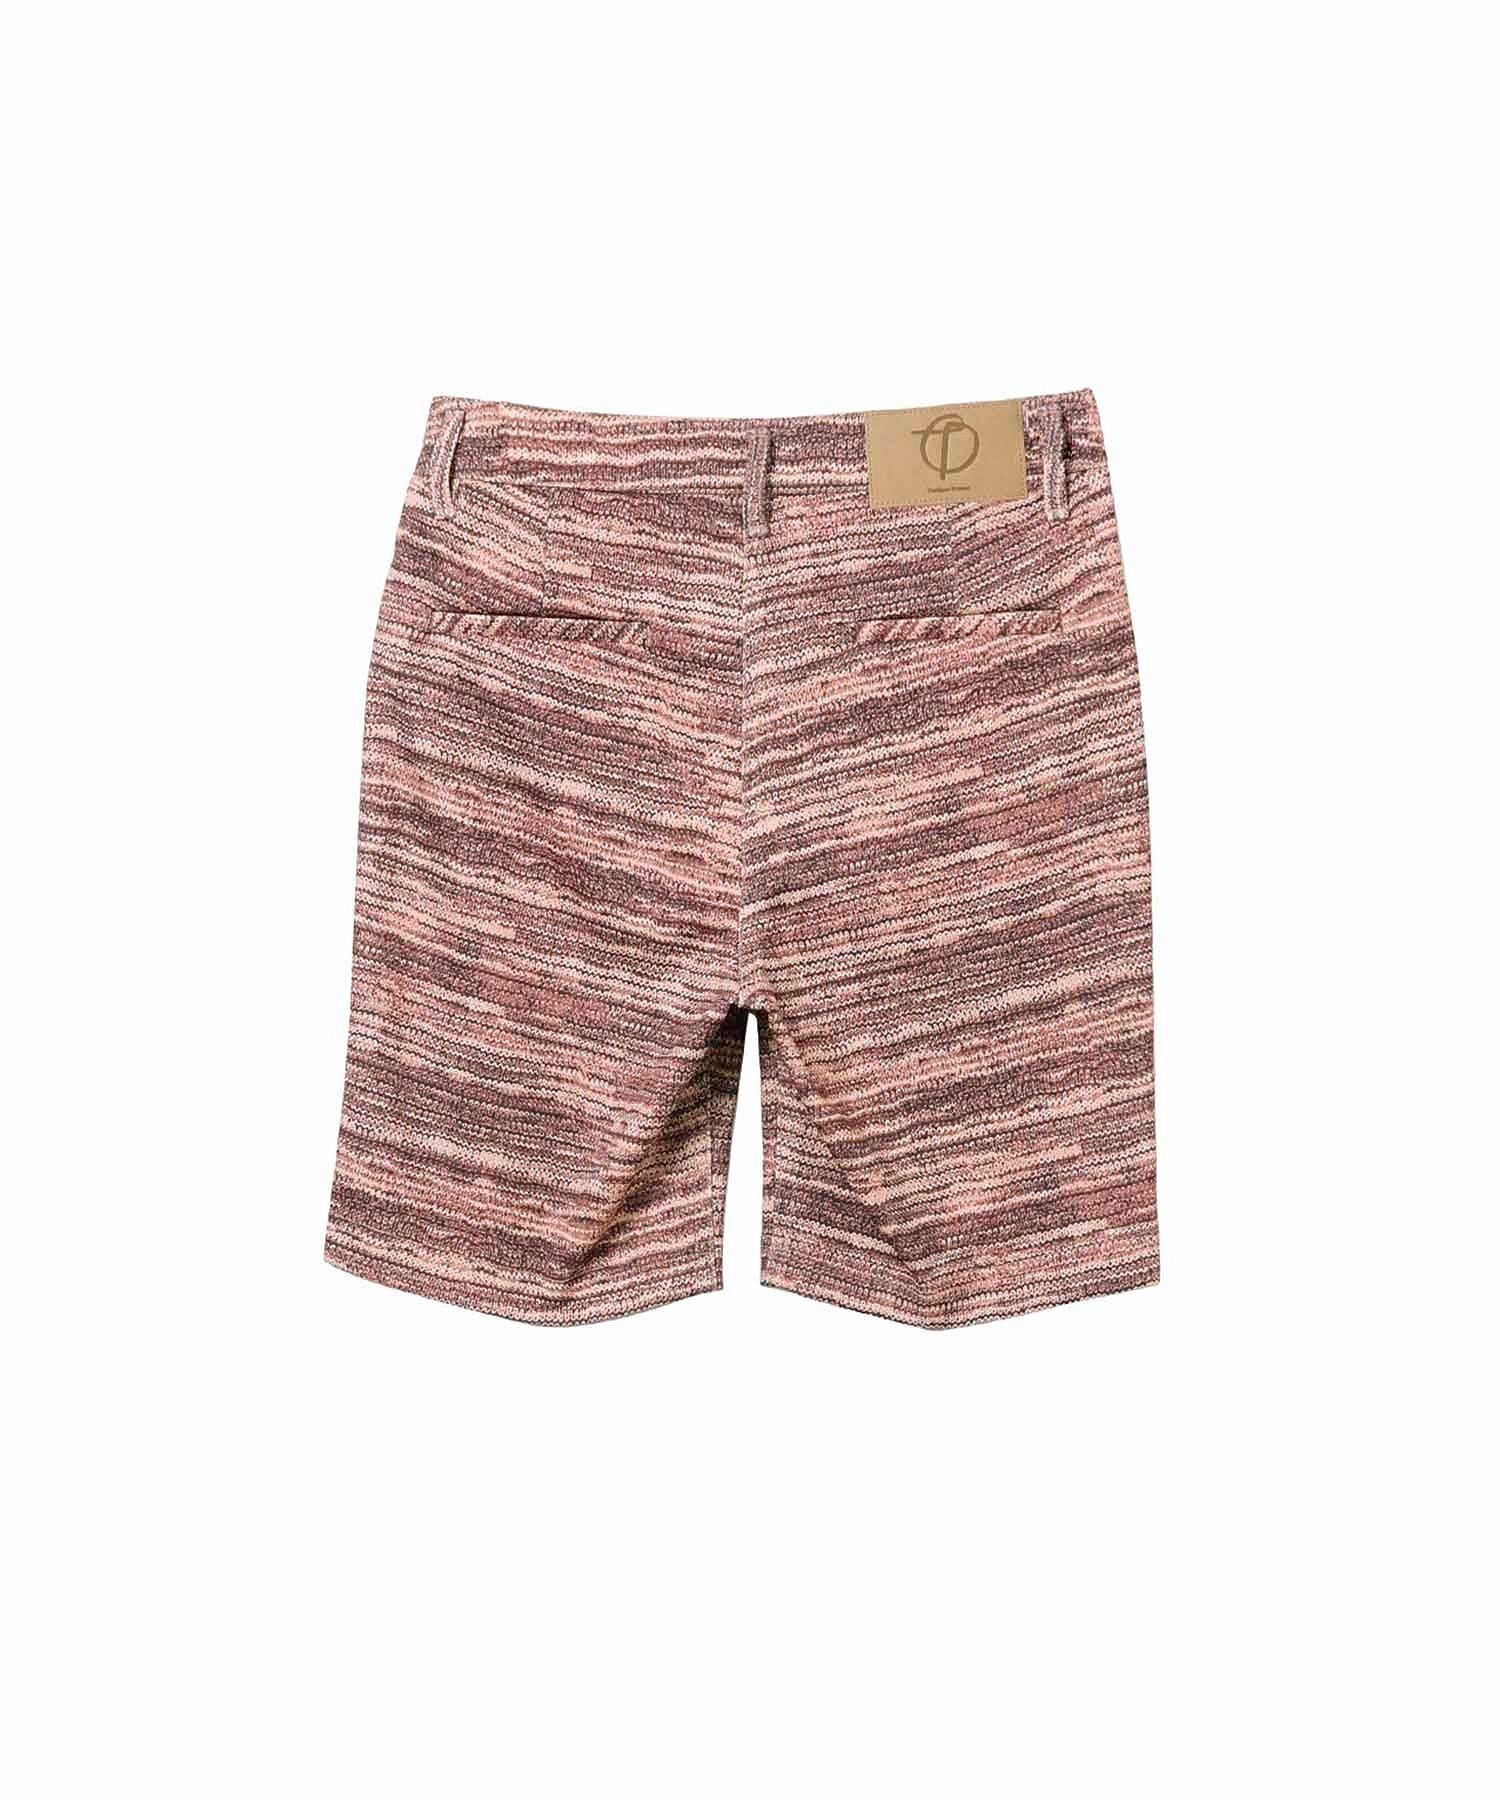 THE OPEN PRODUCT /ザオープンプロダクト/ PRINTED FITTED SHORTS GTO221PT003